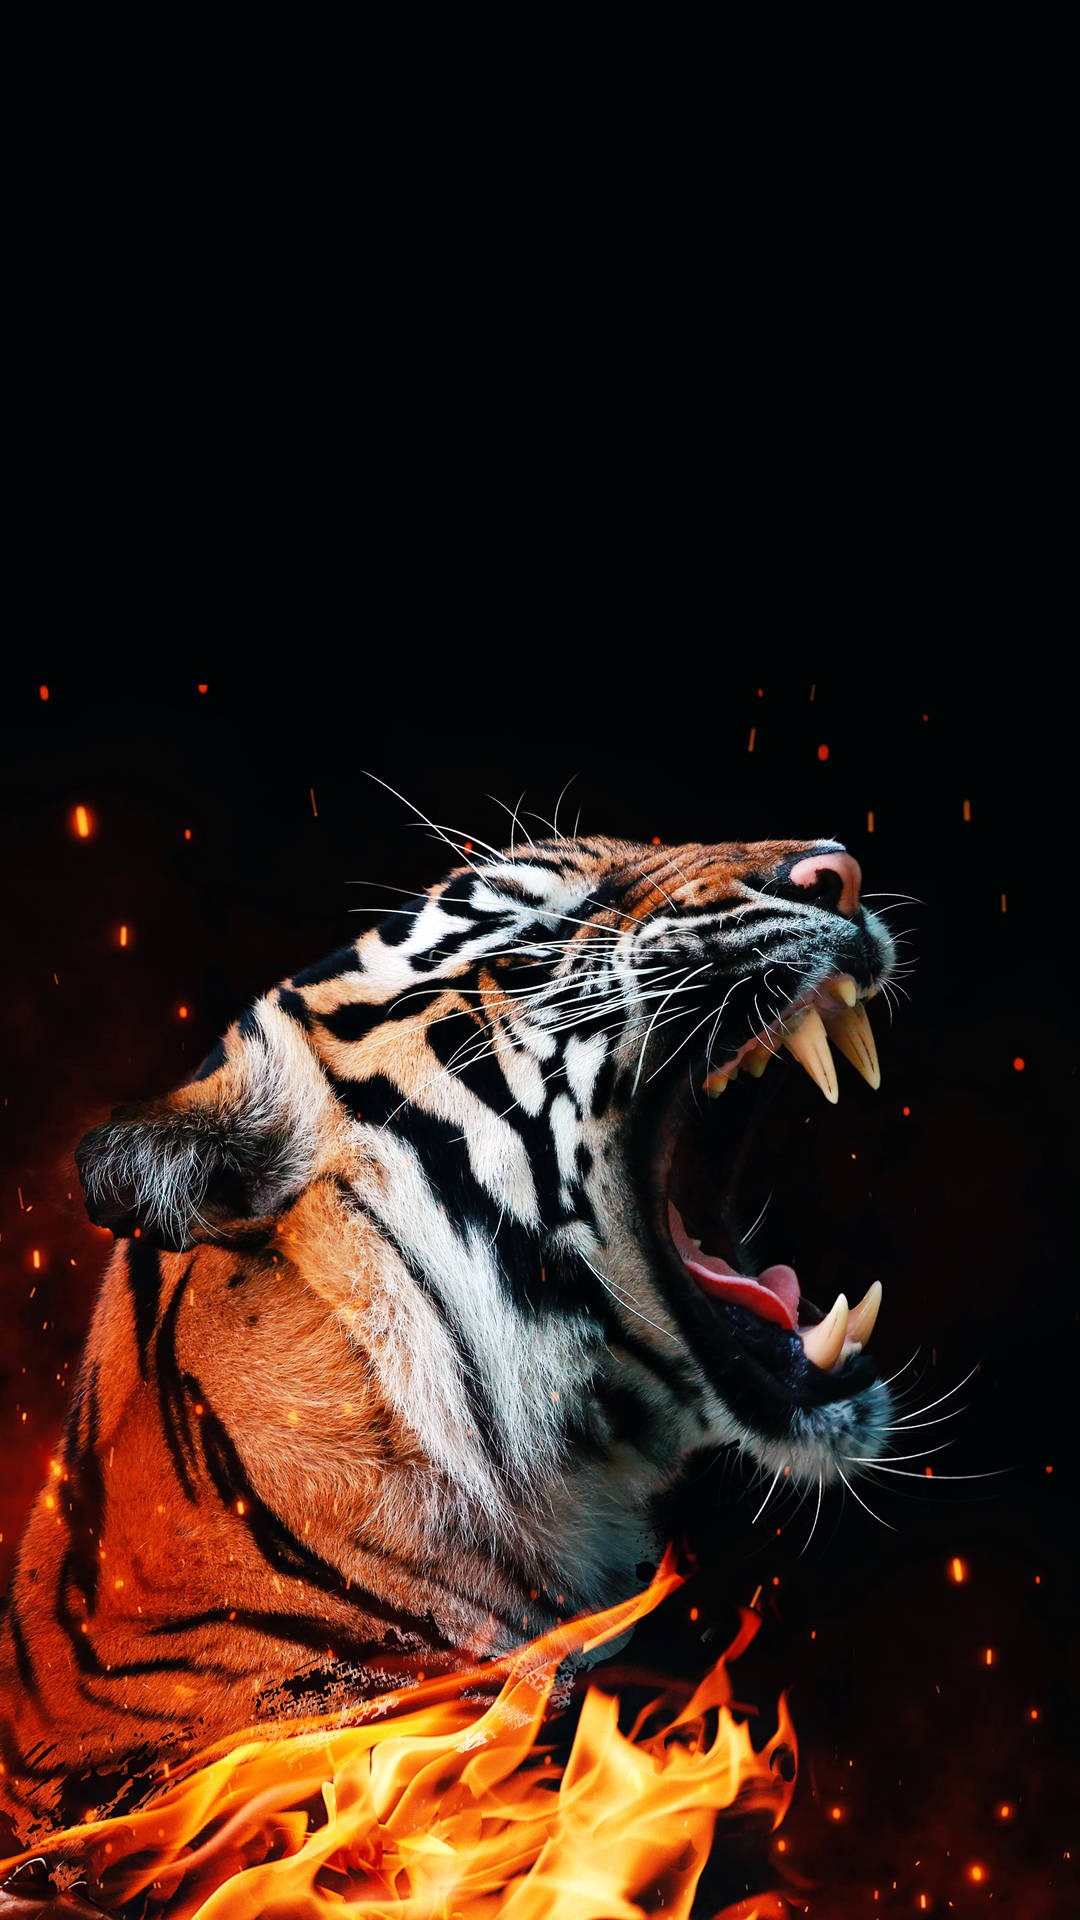 Cool Tiger Photo In Fire Background